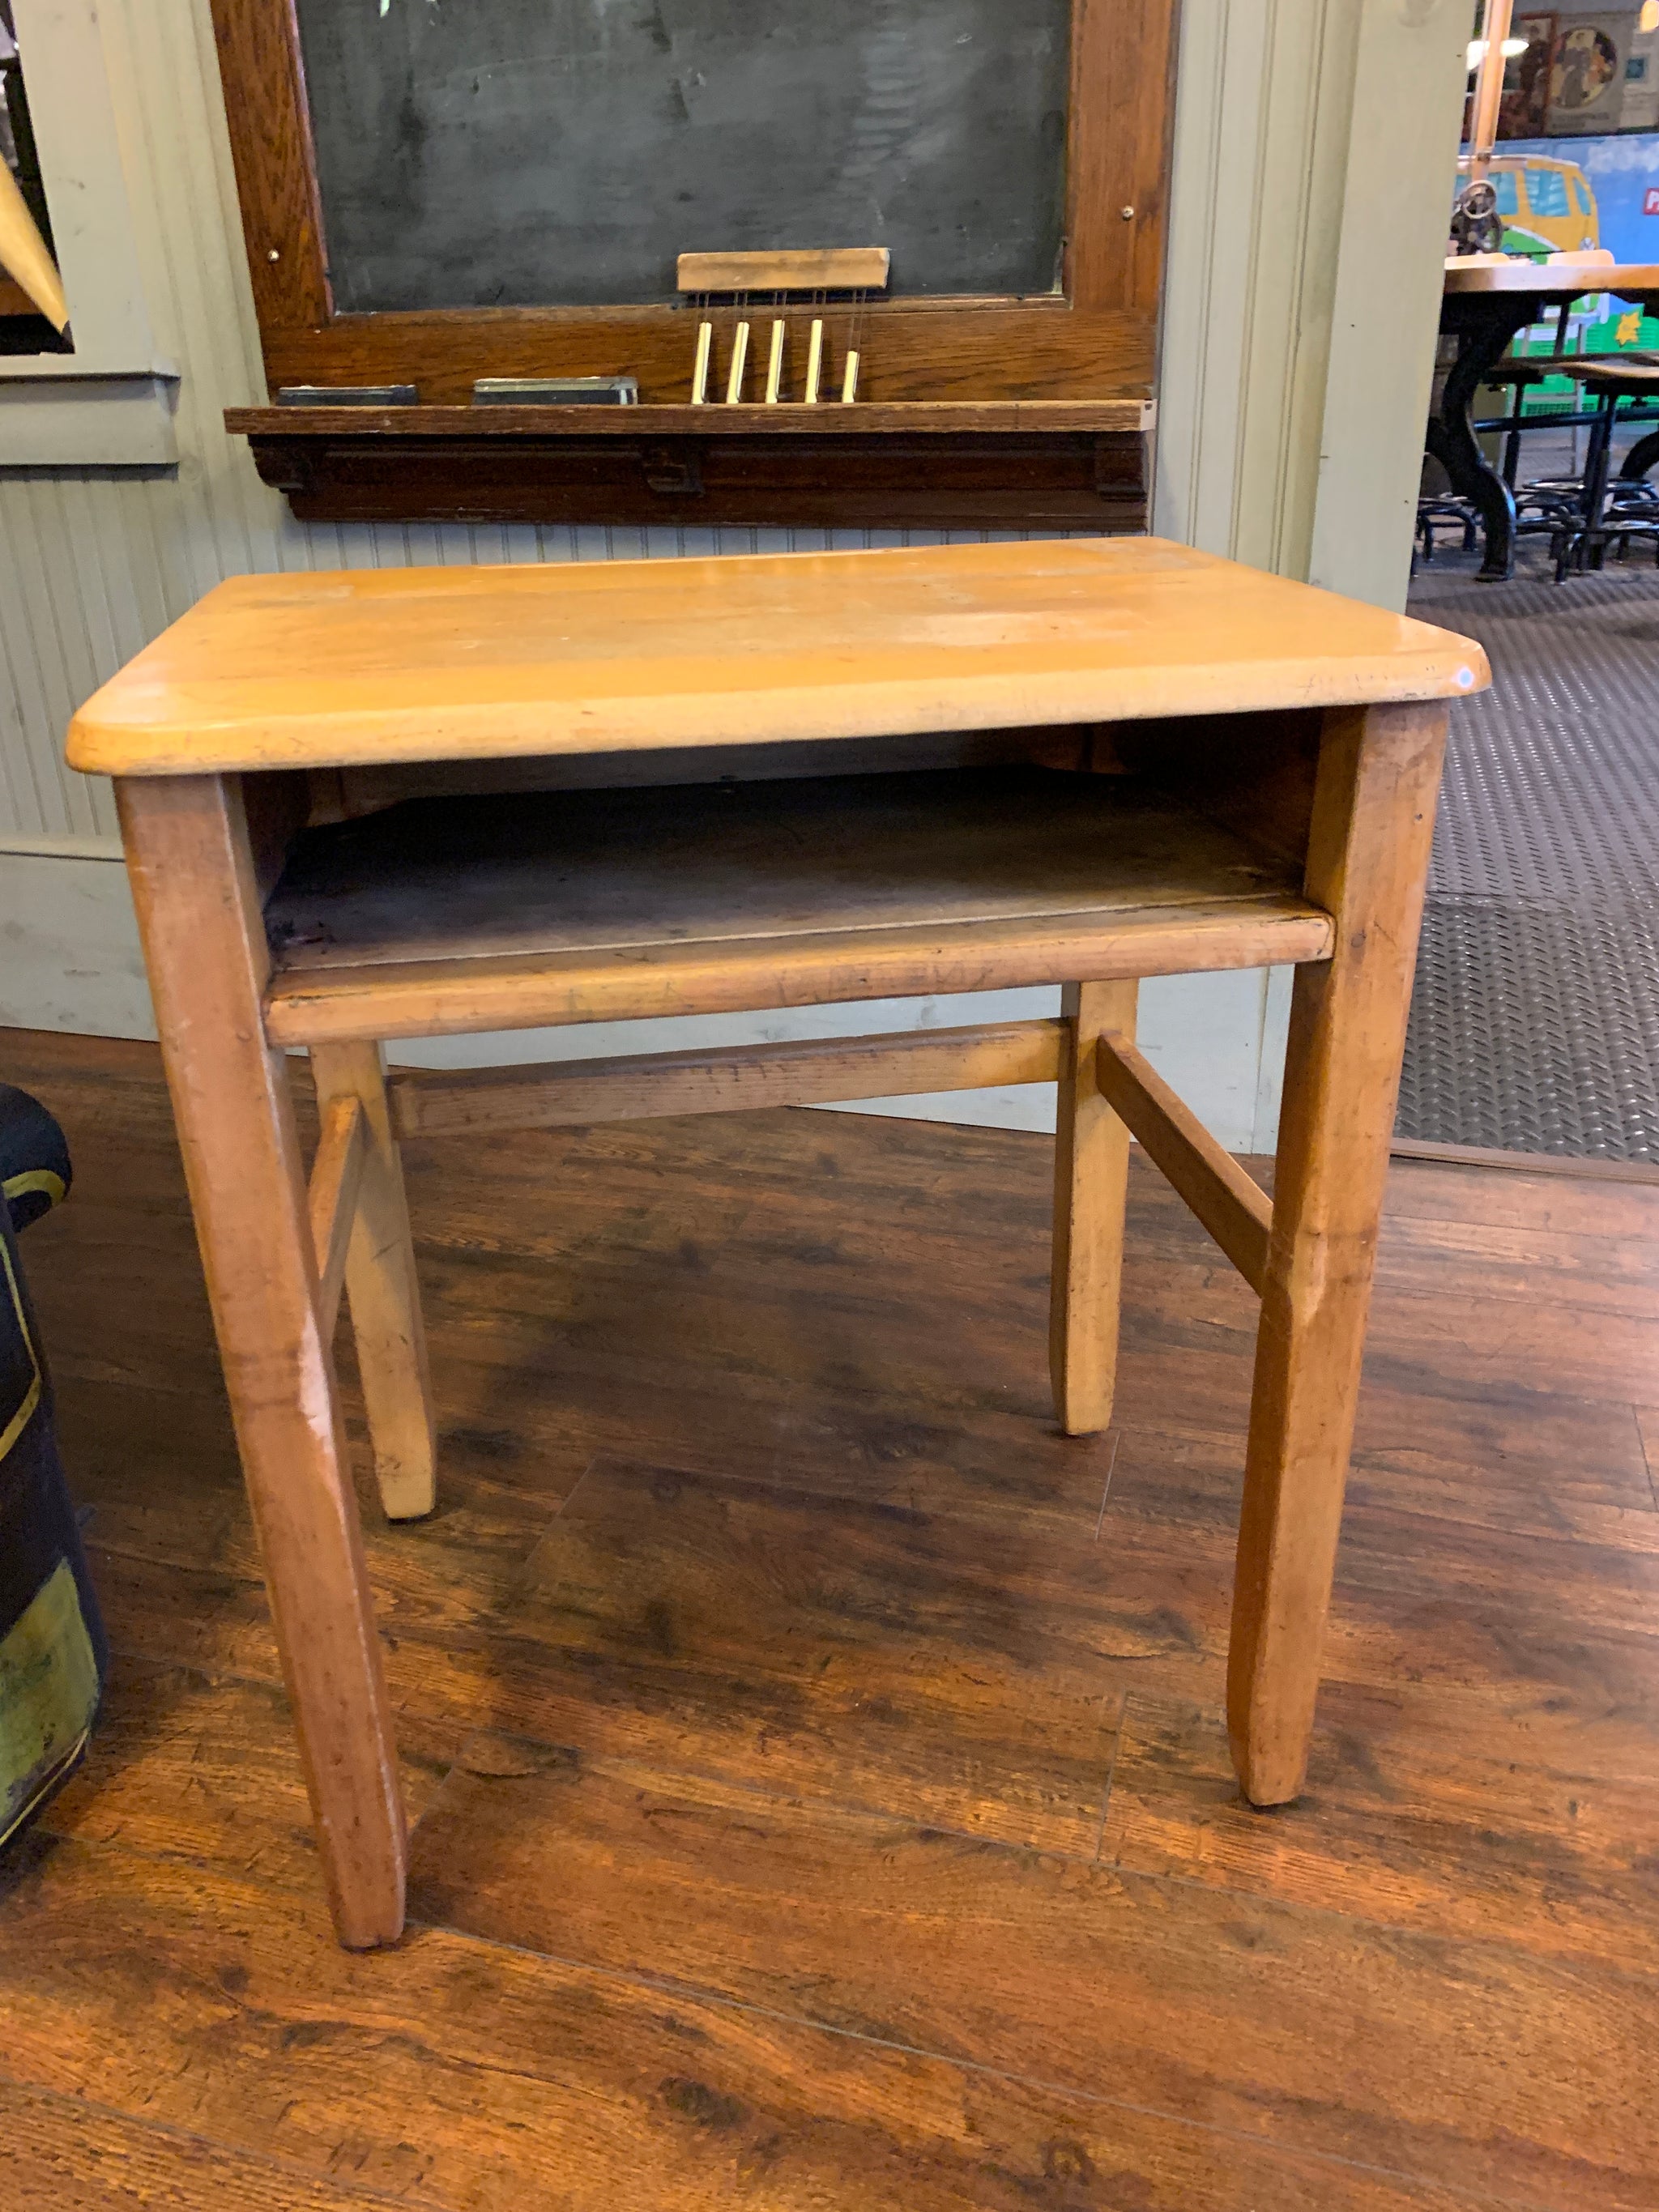 Antique Maple Child S School Desk And Chair Through Pinned Joints